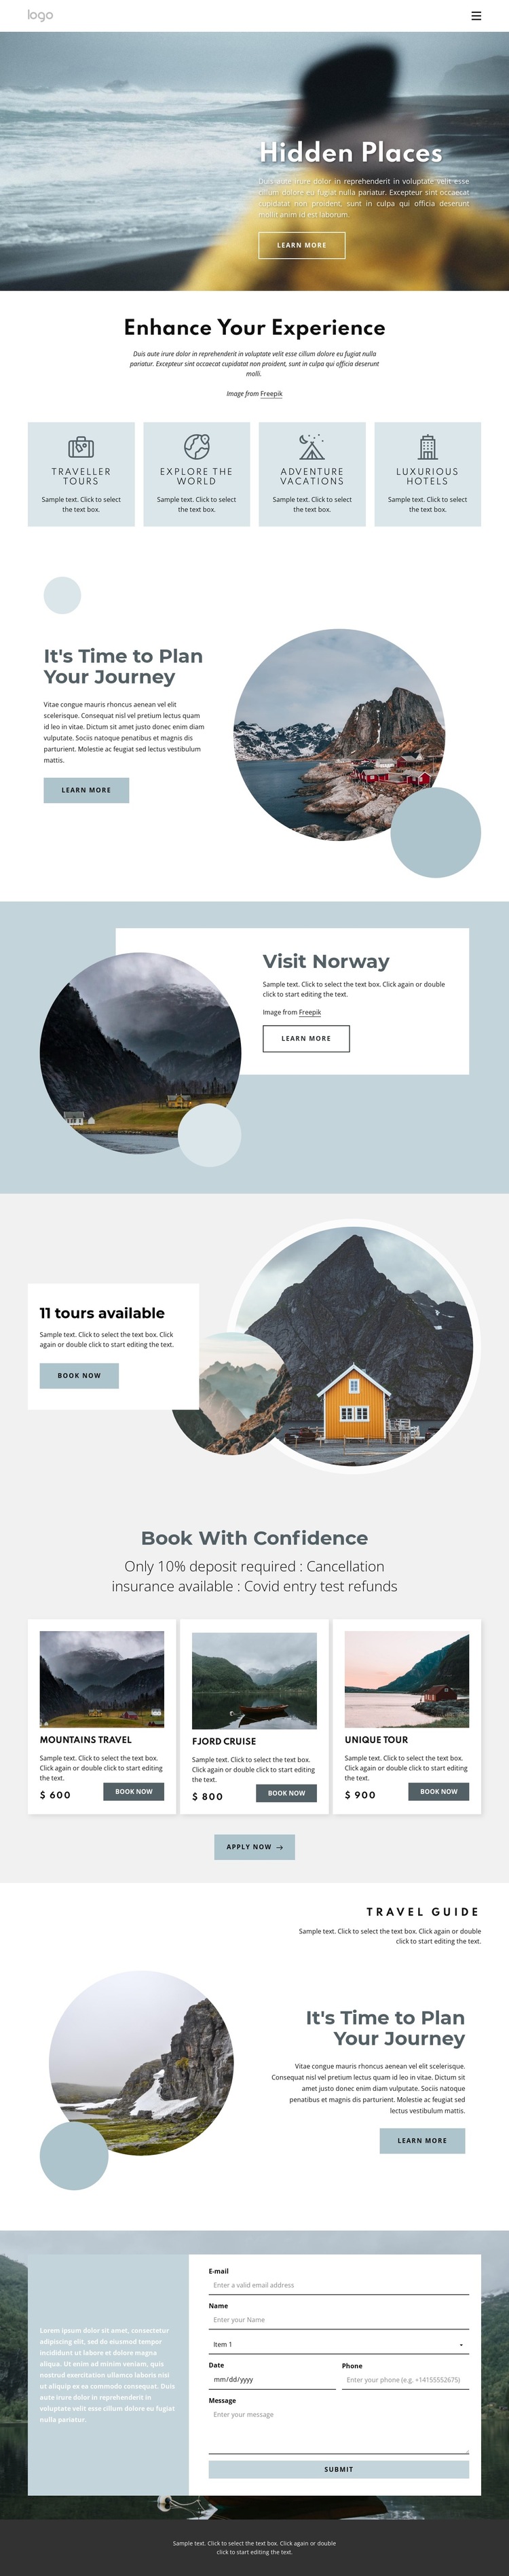 We find the hidden places HTML5 Template